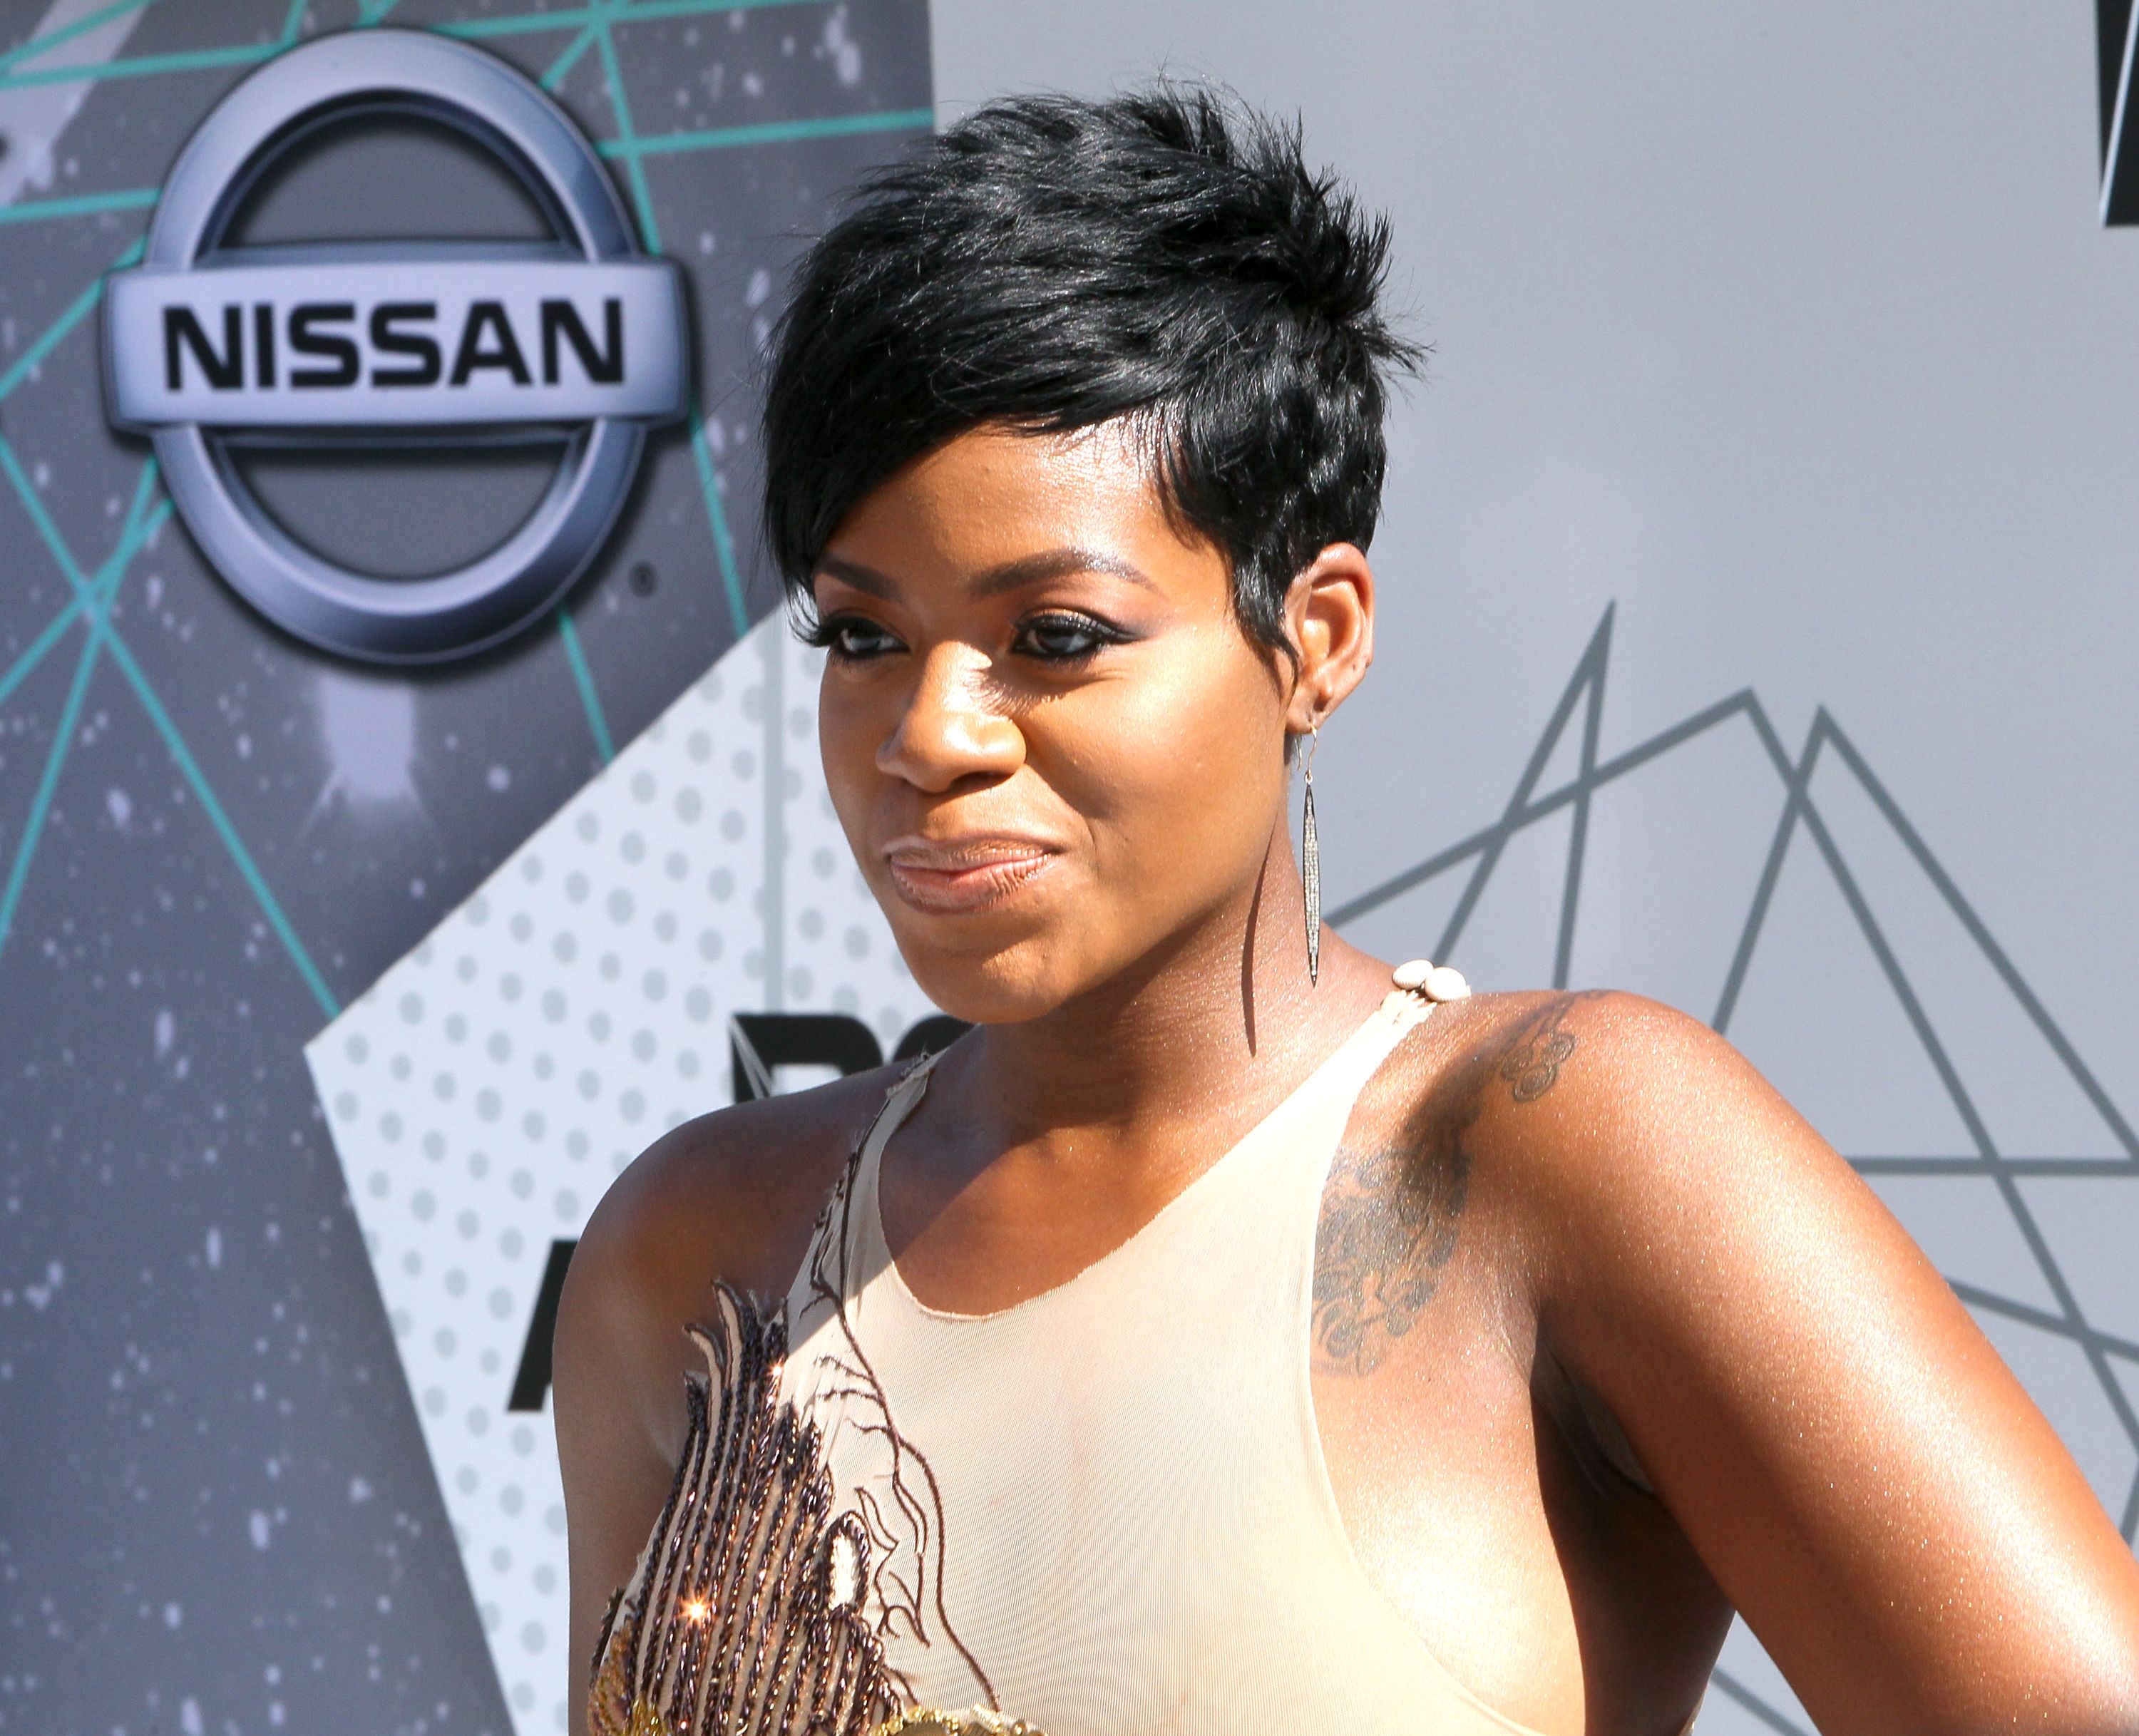 Fantasia Barrino at the 2016 BET Awards at the Microsoft Theater. | Photo: Getty Images